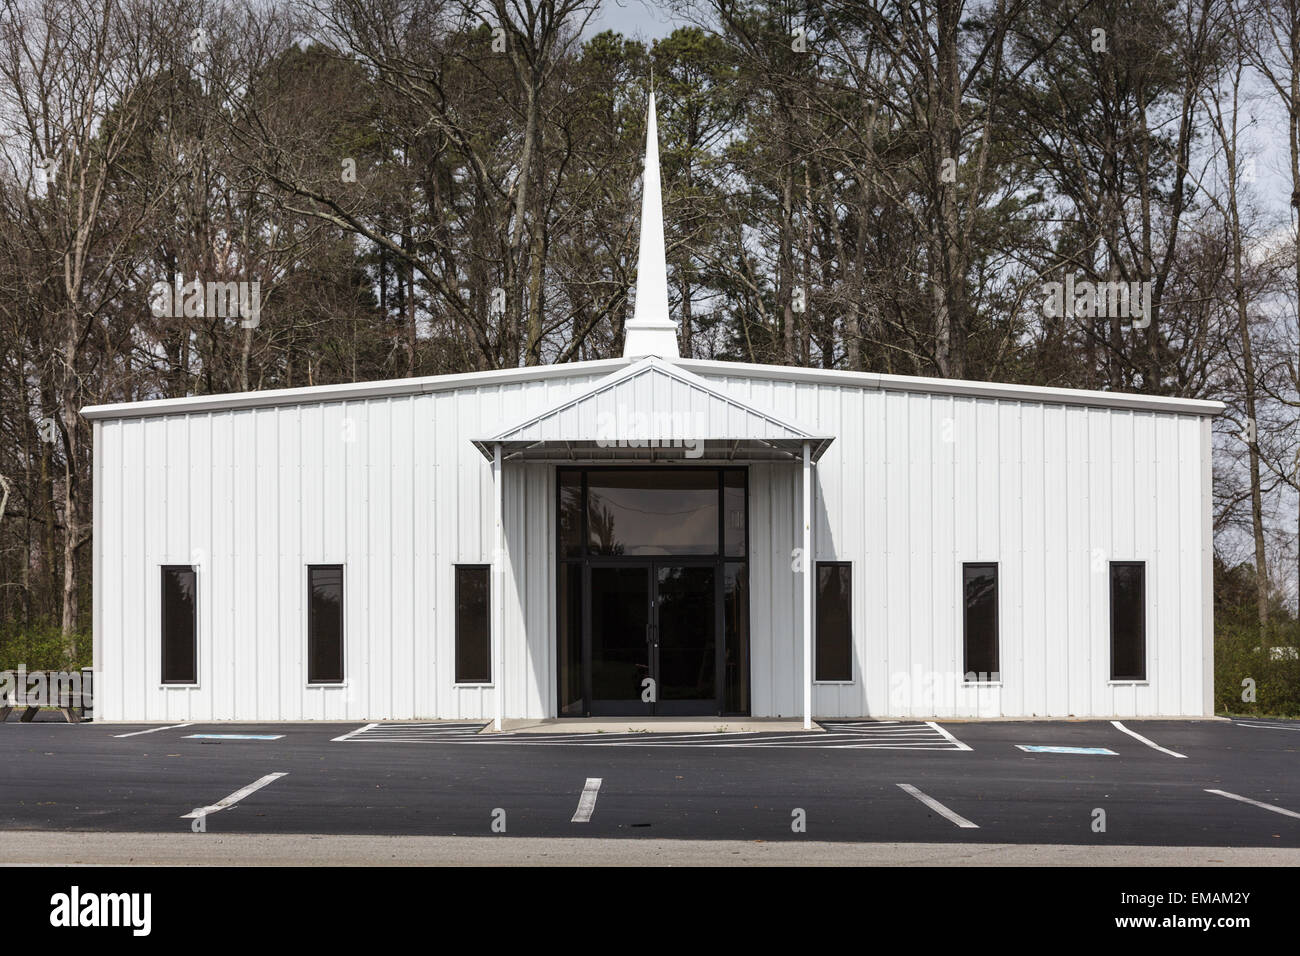 Rather droll-looking church in the Bible Belt, Ocoee, Tennessee Stock Photo